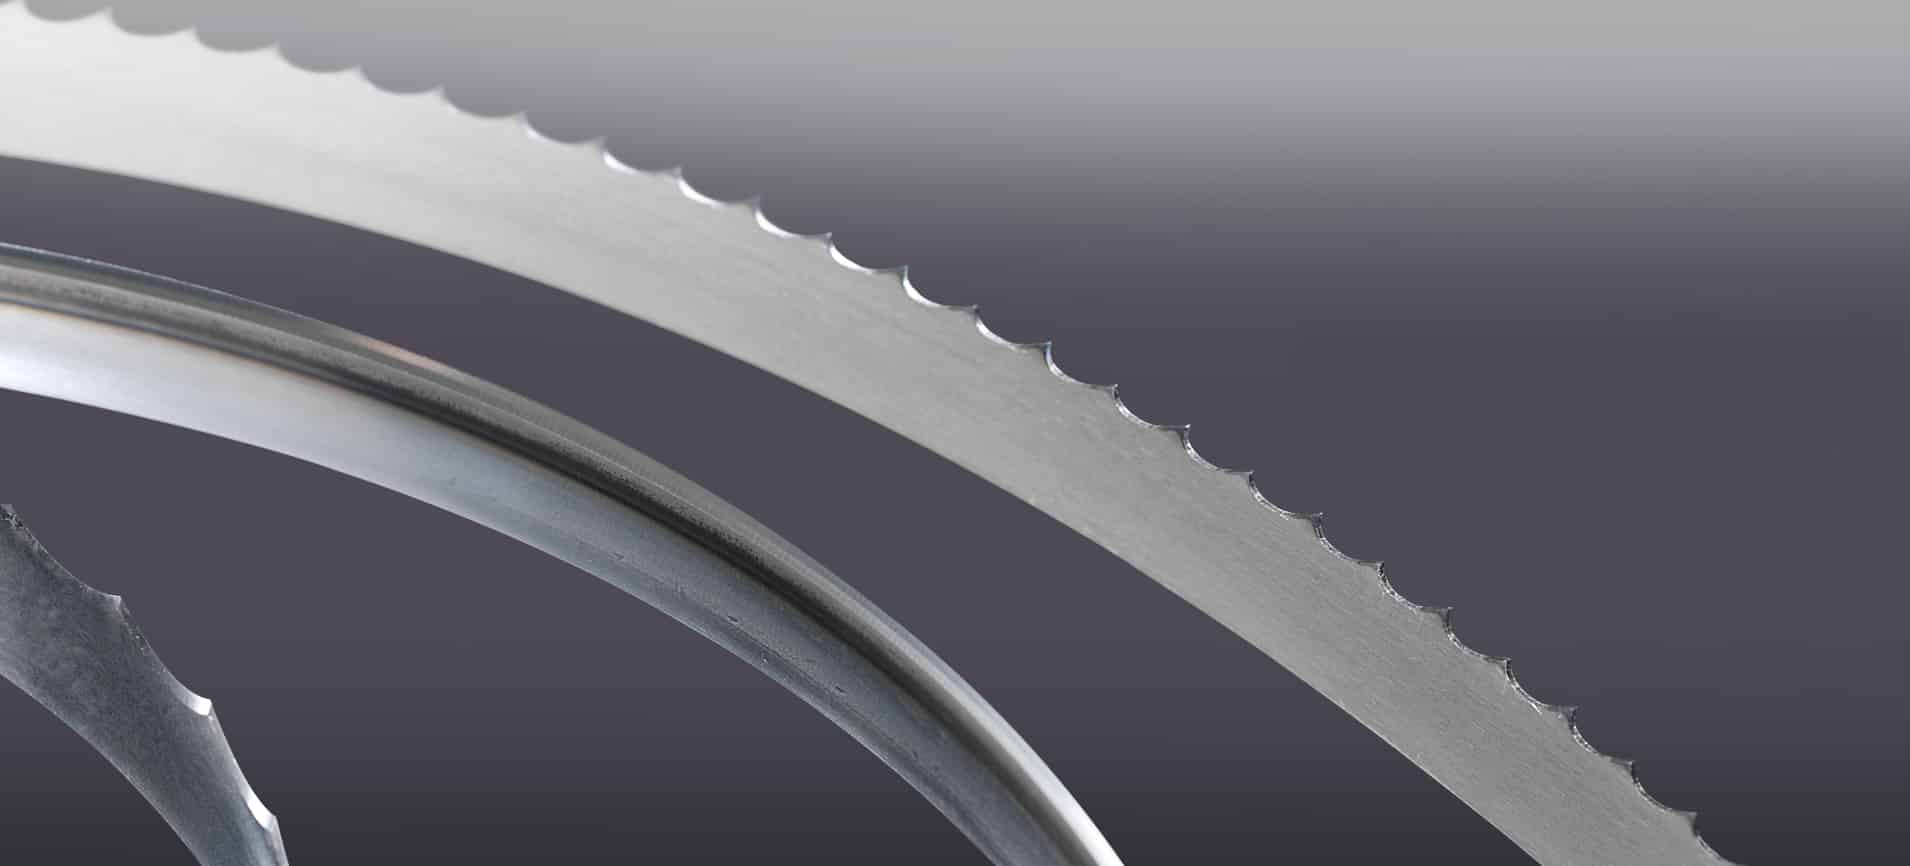 Simmons' food processing bandsaw blades curve and catch the light in front of a dark gray background.